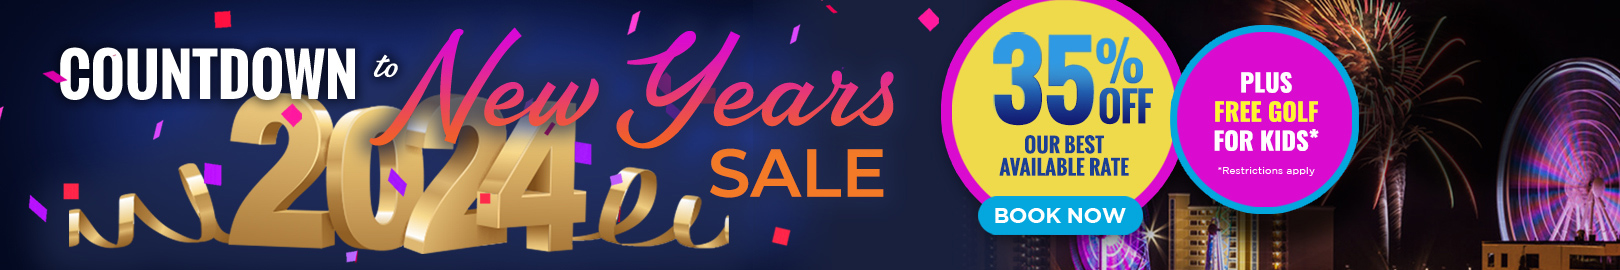 Countdown to New Year's Sale - 35% Off